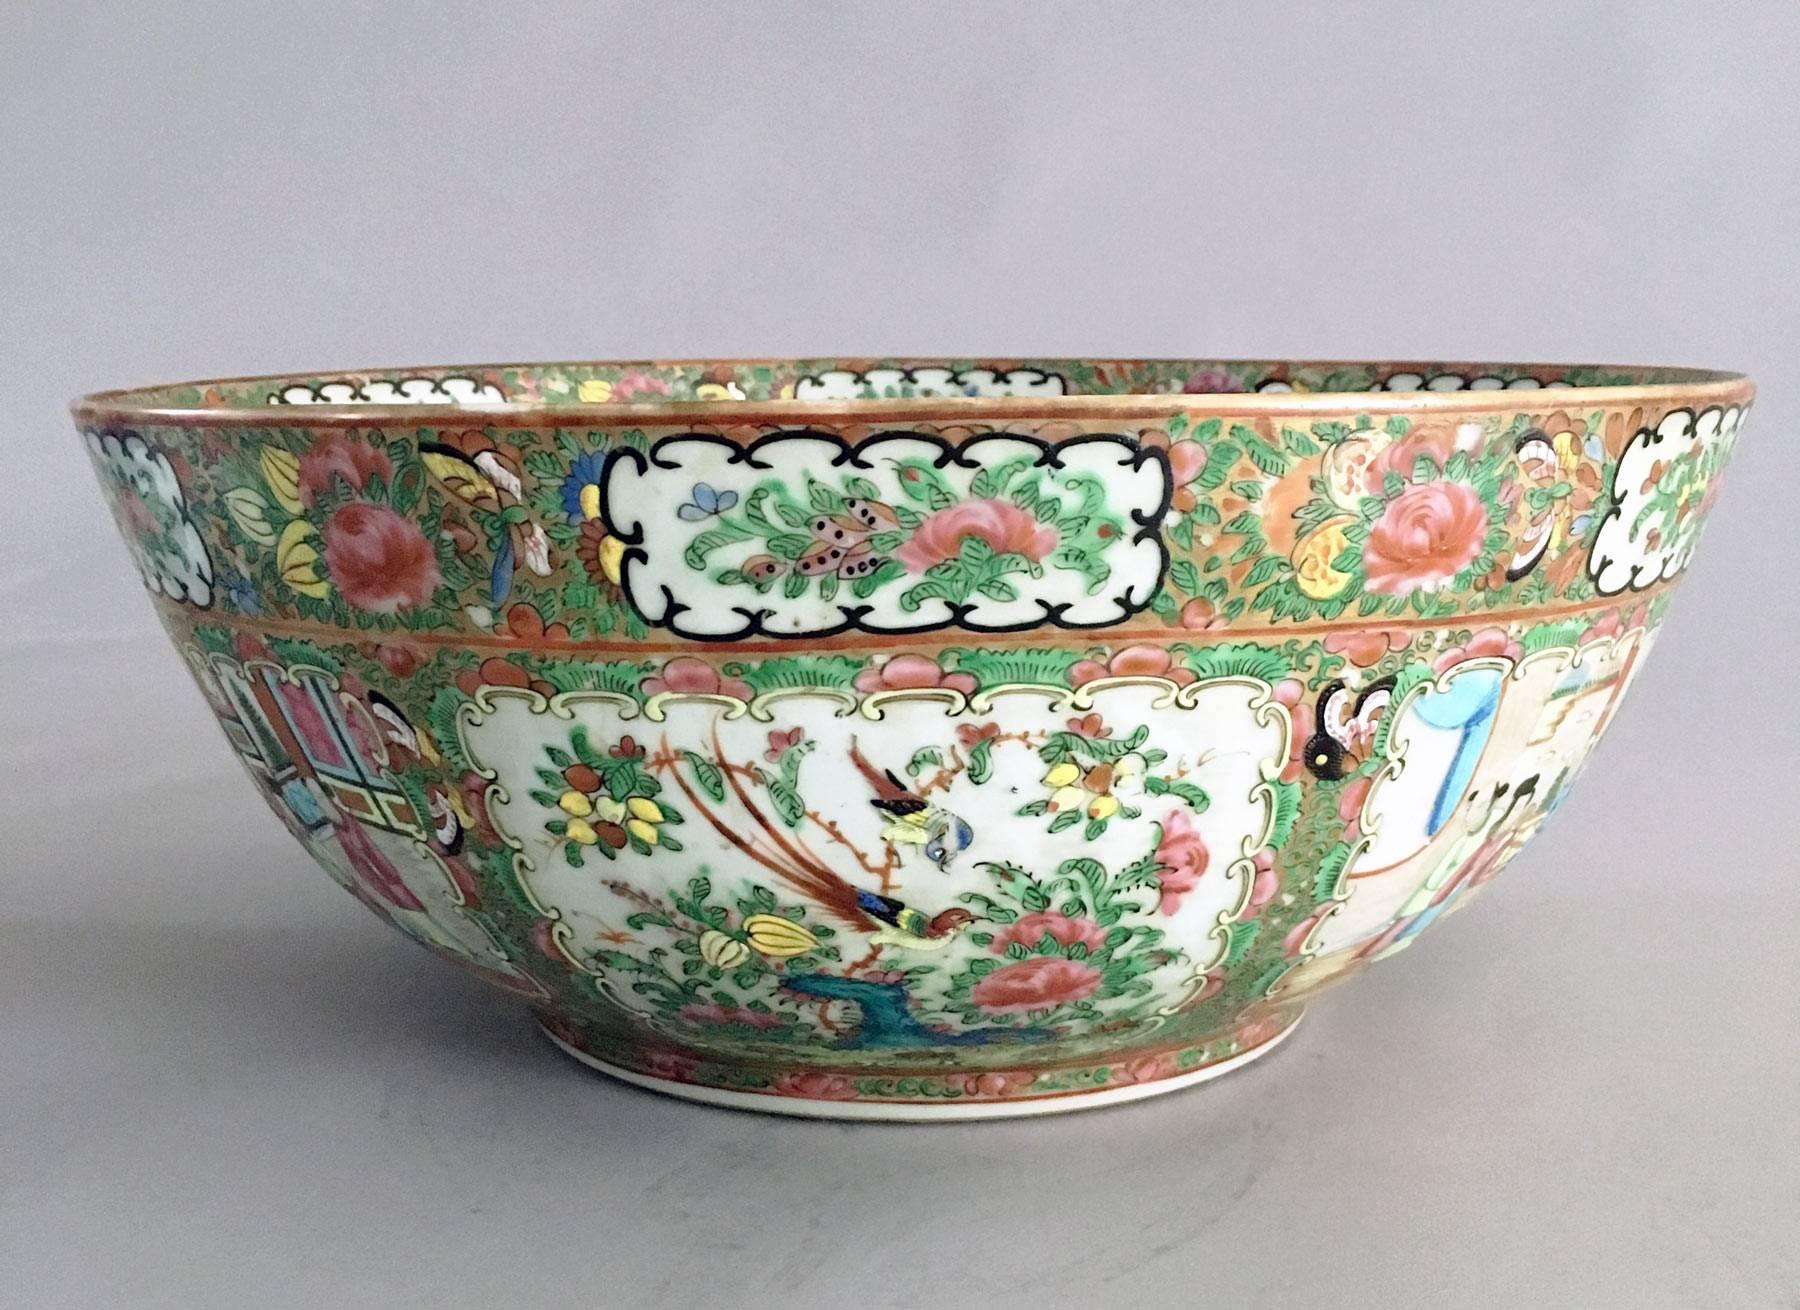 Chinese porcelain rose medallion large punch bowl decorated with six alternating panels inside and outside of court scenes of figures; birds and flowers. The very center medallion is of a rose and a bird surrounded by four panels. The usual colors